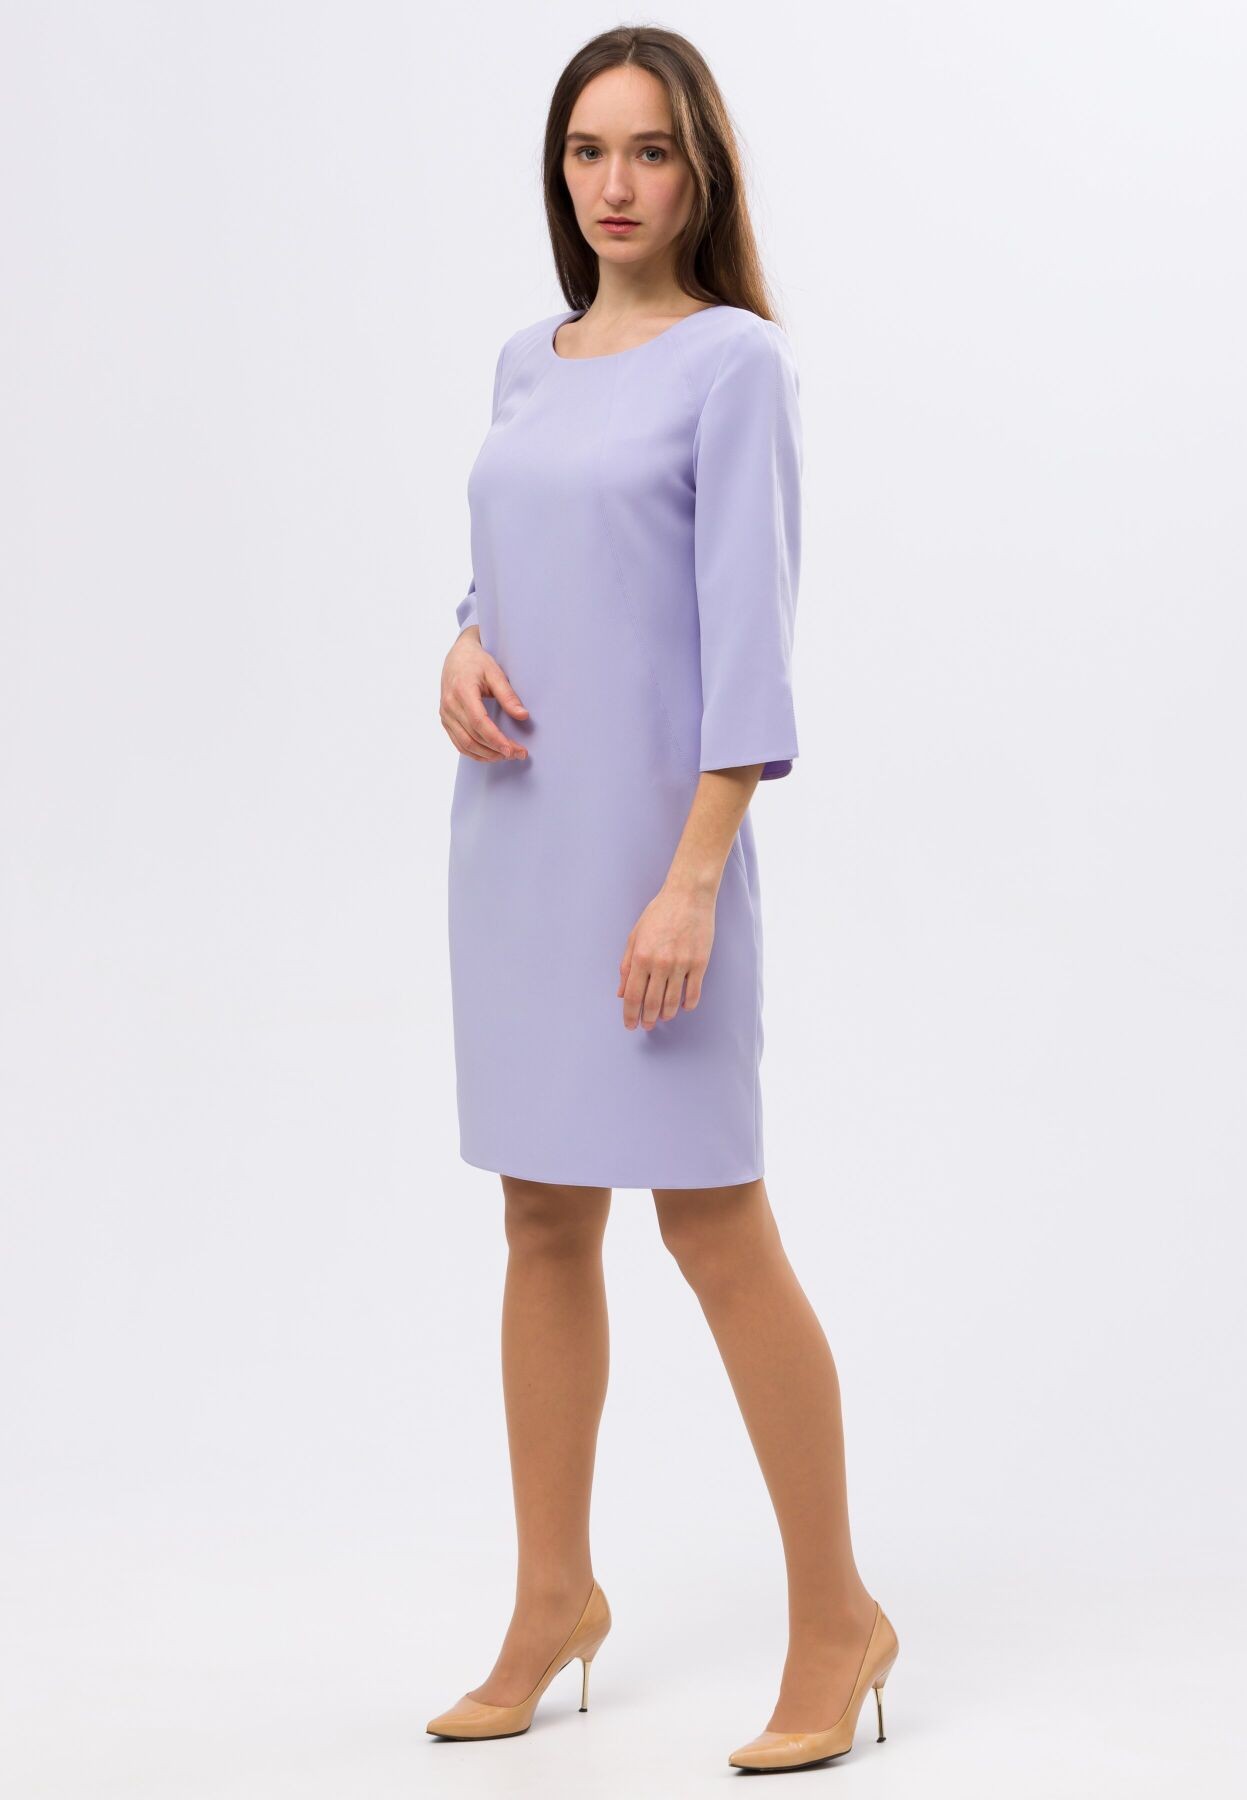 Gentle lilac dress of straight cut with decorative delay 5689